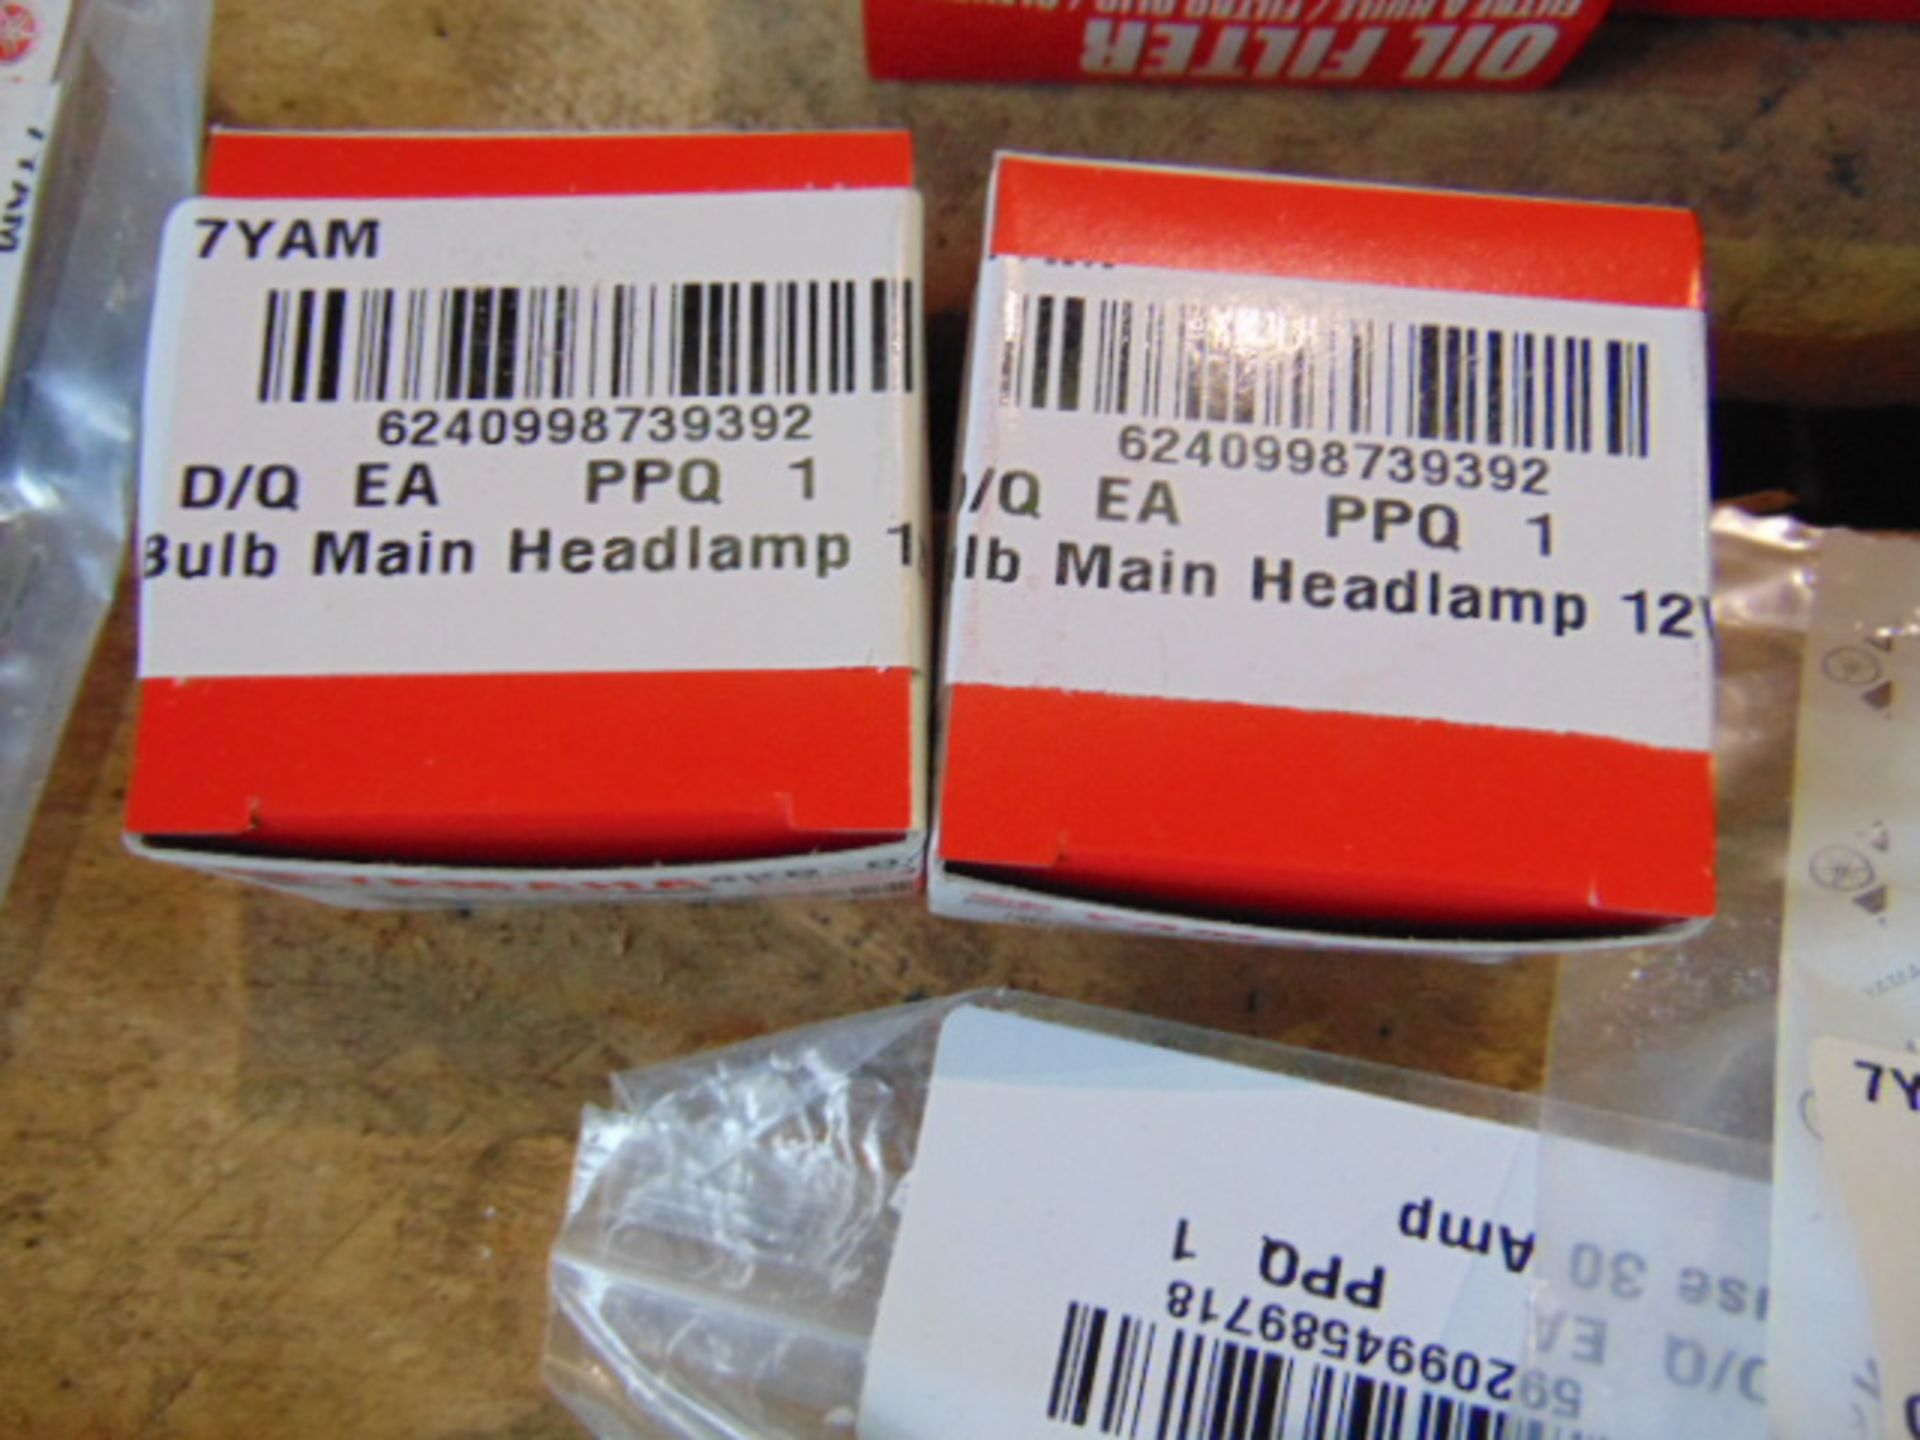 Yamaha Grizzly Maintenance Spares consisting of Spark Plugs, Filters, Belts, Lamps, Fuses Brake Pads - Image 6 of 10